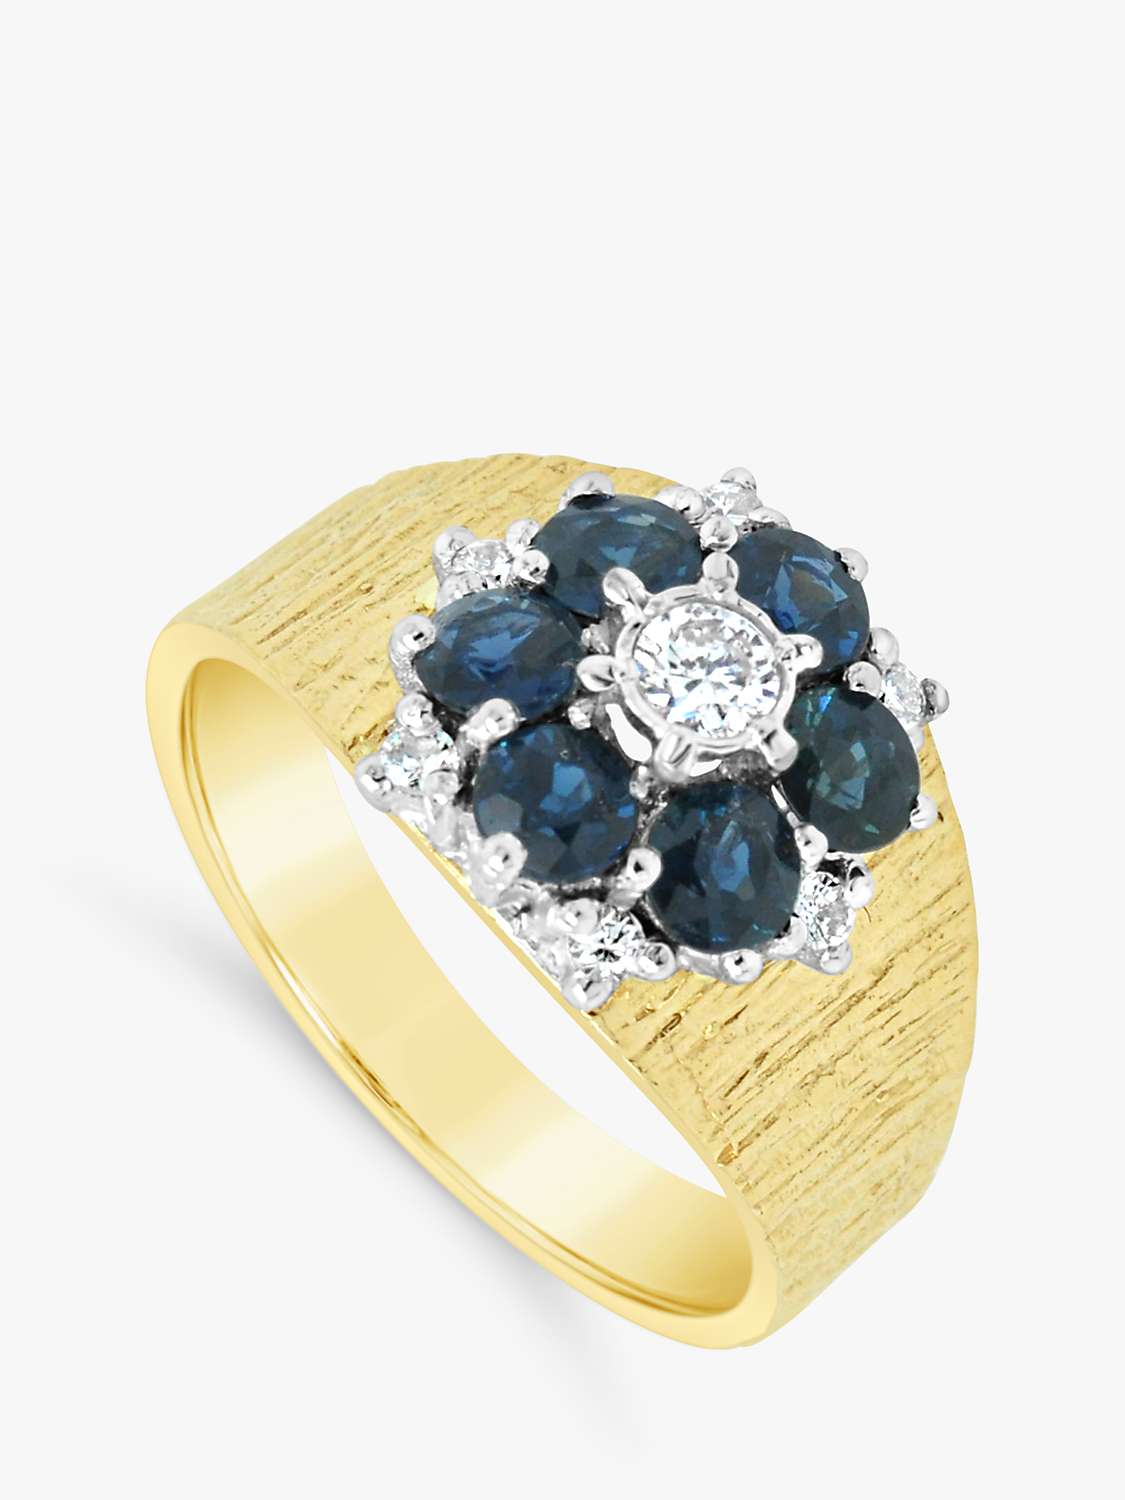 Buy Milton & Humble Jewellery Second Hand 18ct White & Yellow Gold Sapphire & Diamond Floral Cluster Ring, Dated London 1978 Online at johnlewis.com